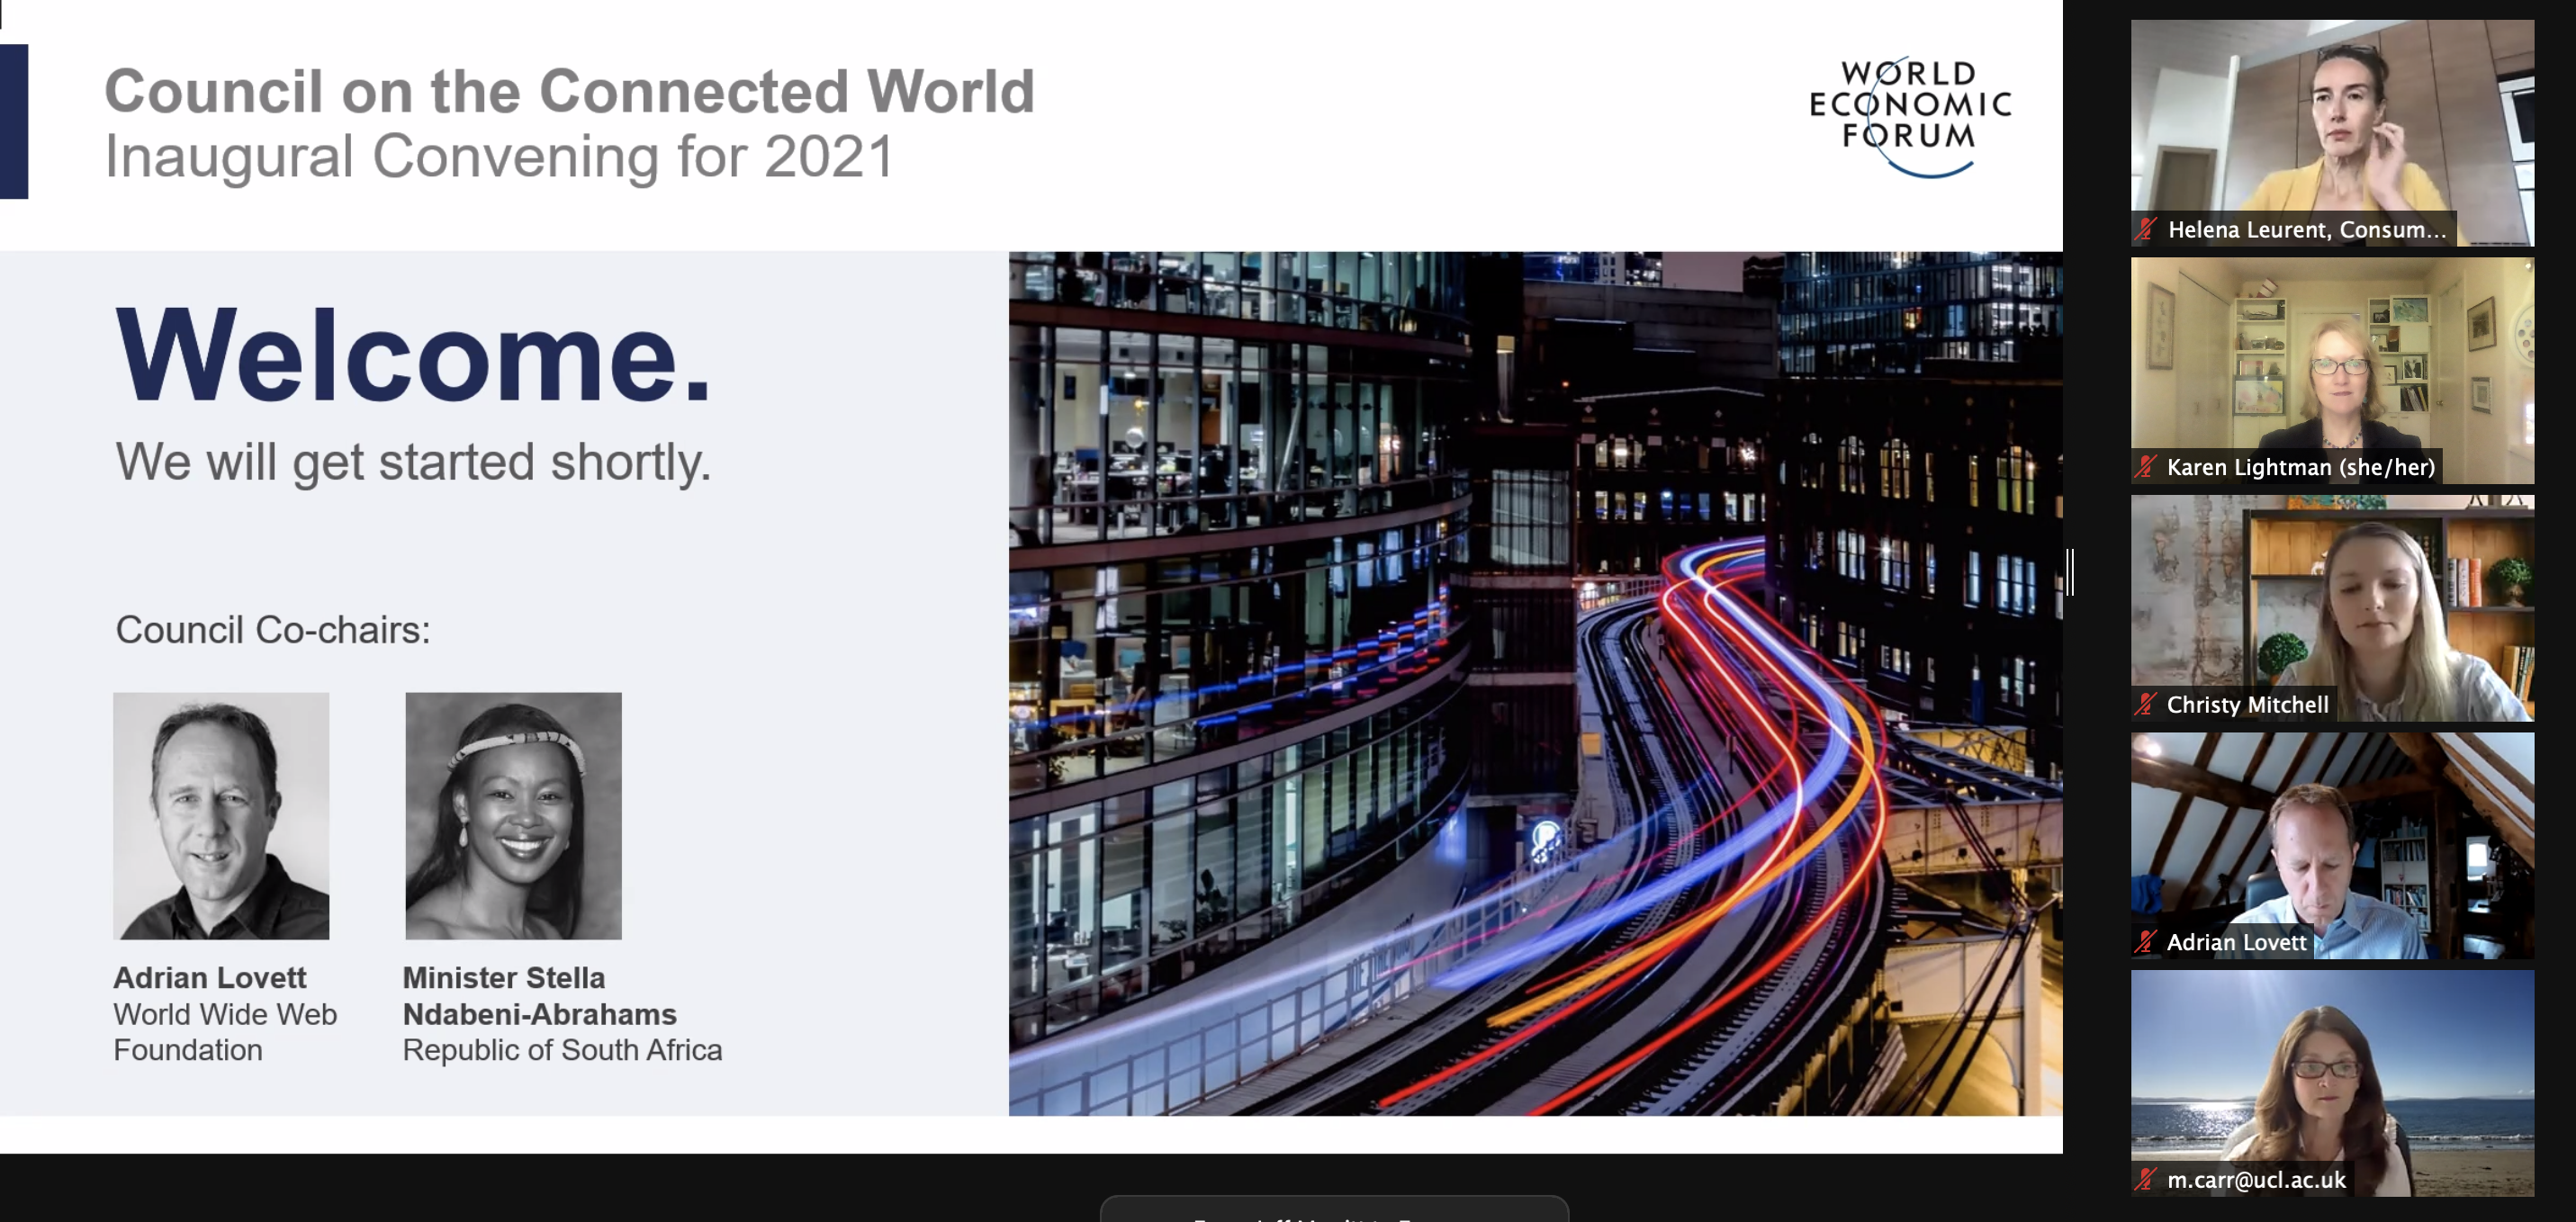 World Economic Forum Council on the Connected Worlds